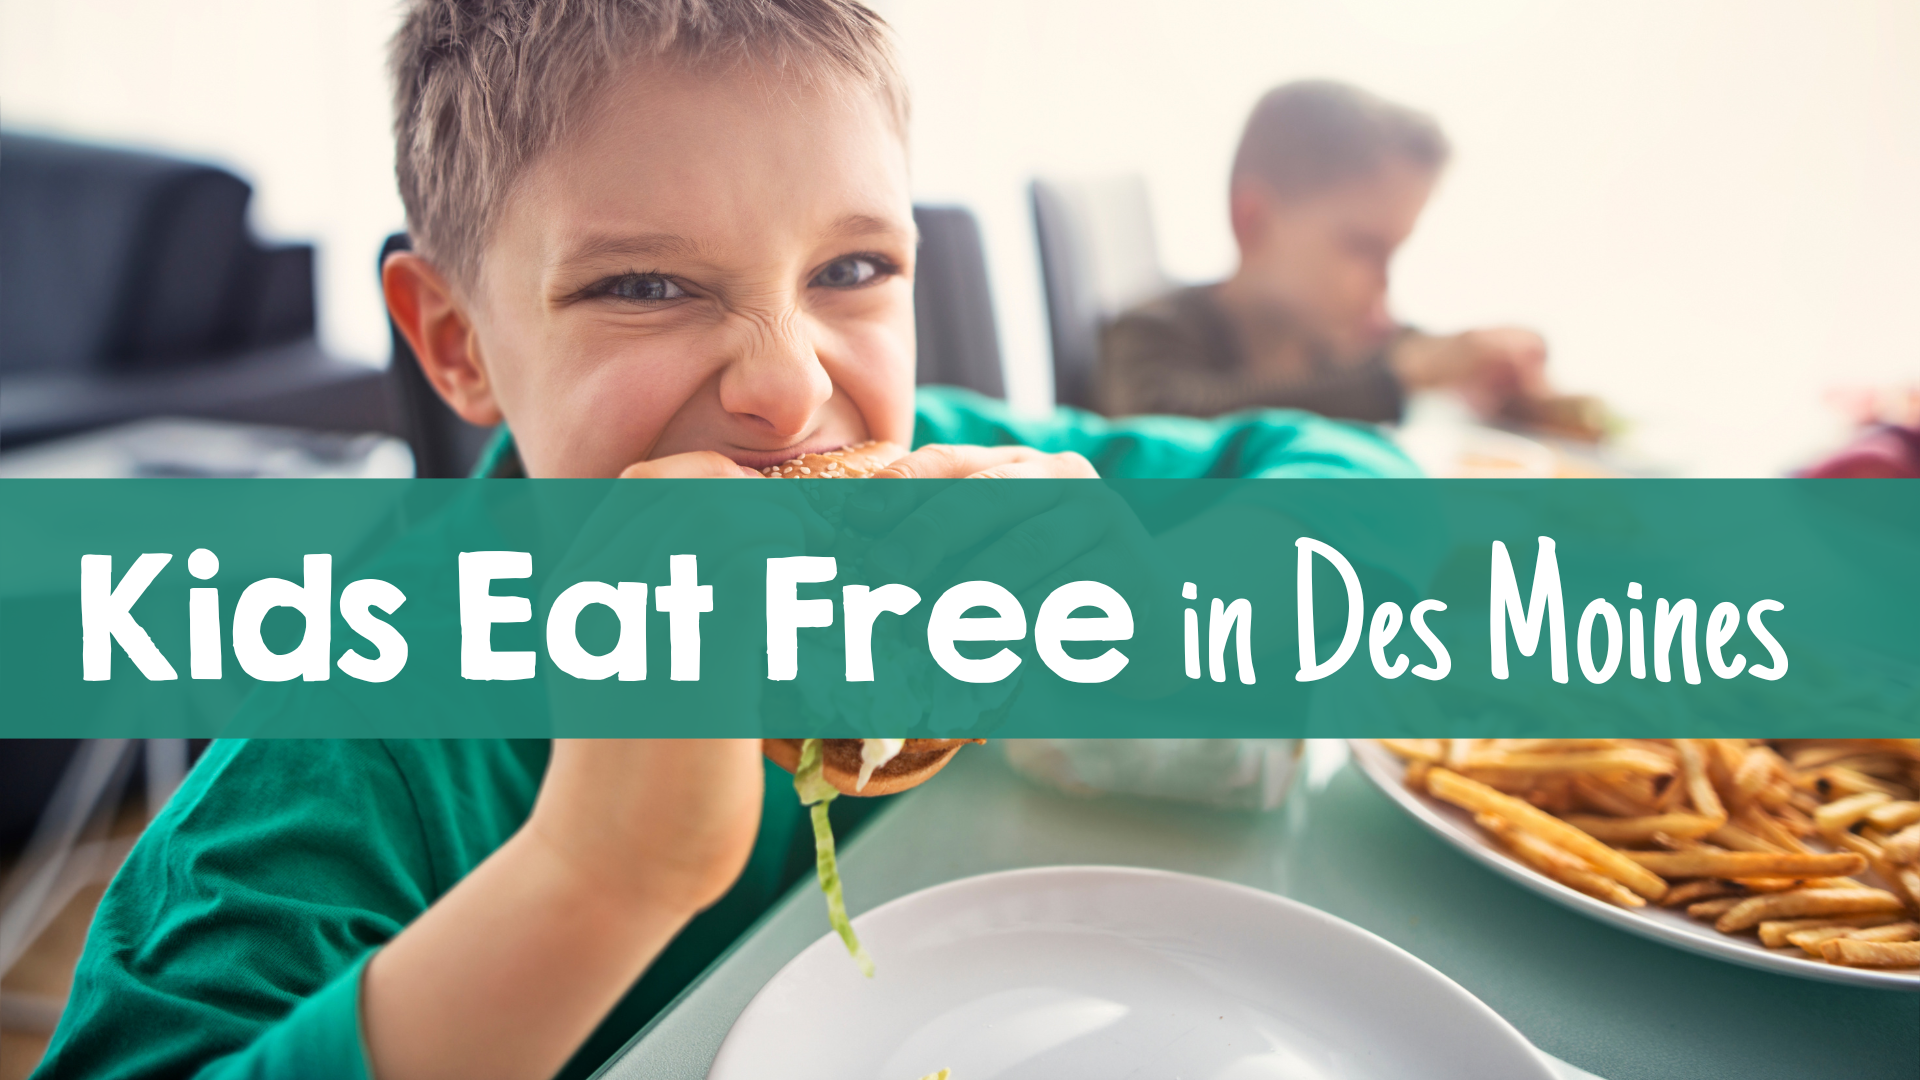 A List of Places Kids Eat Free in Des Moines, Iowa